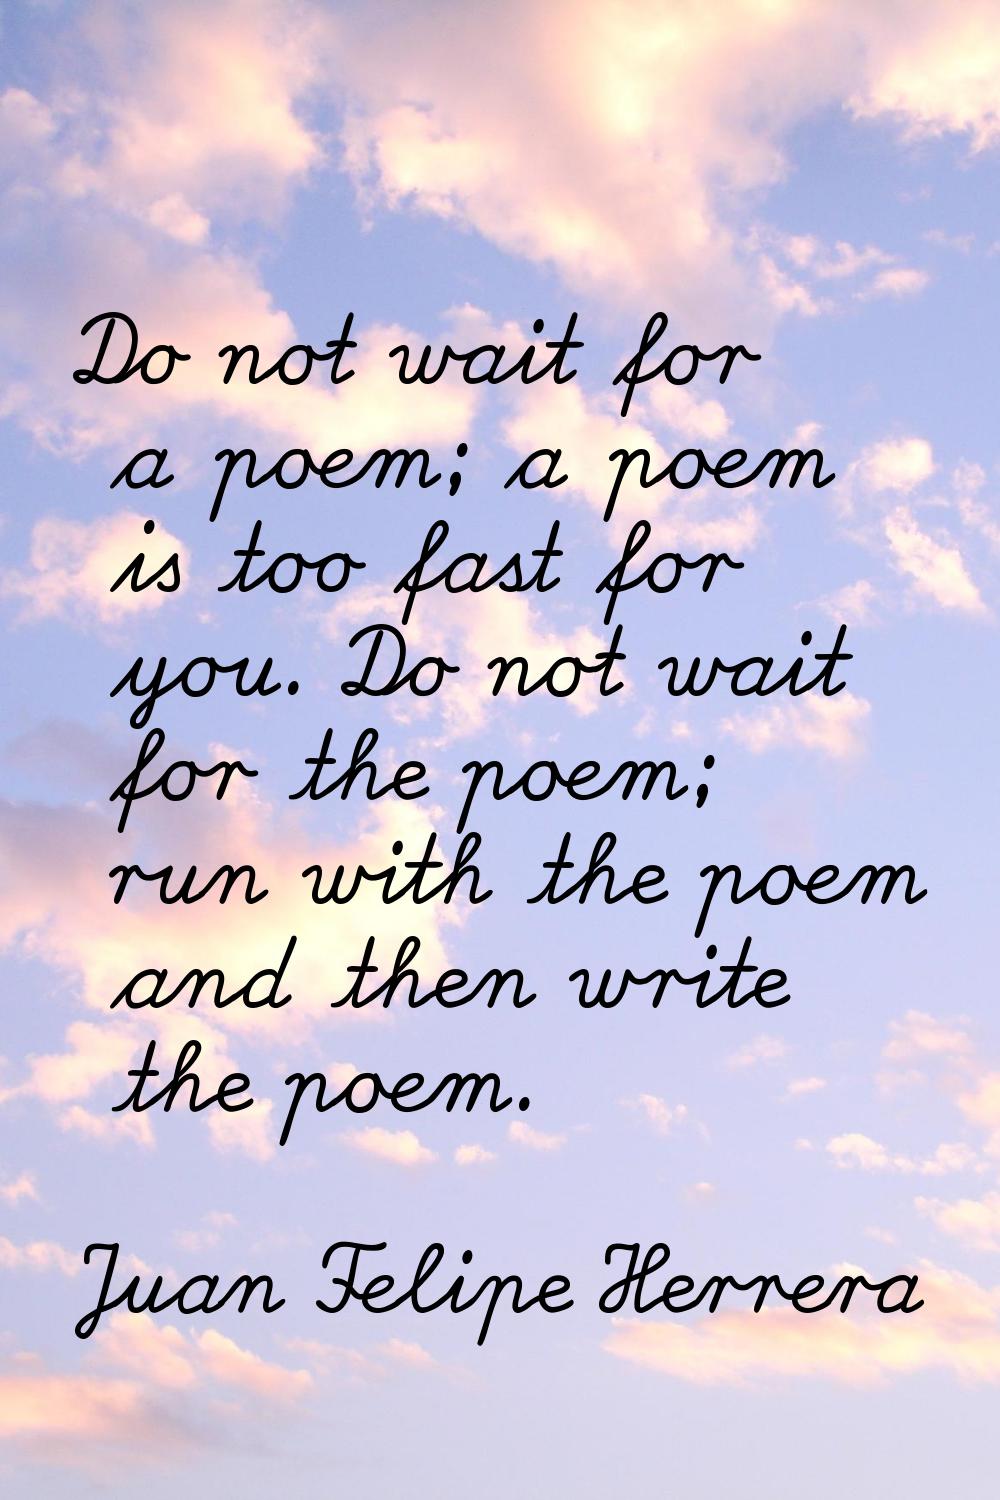 Do not wait for a poem; a poem is too fast for you. Do not wait for the poem; run with the poem and